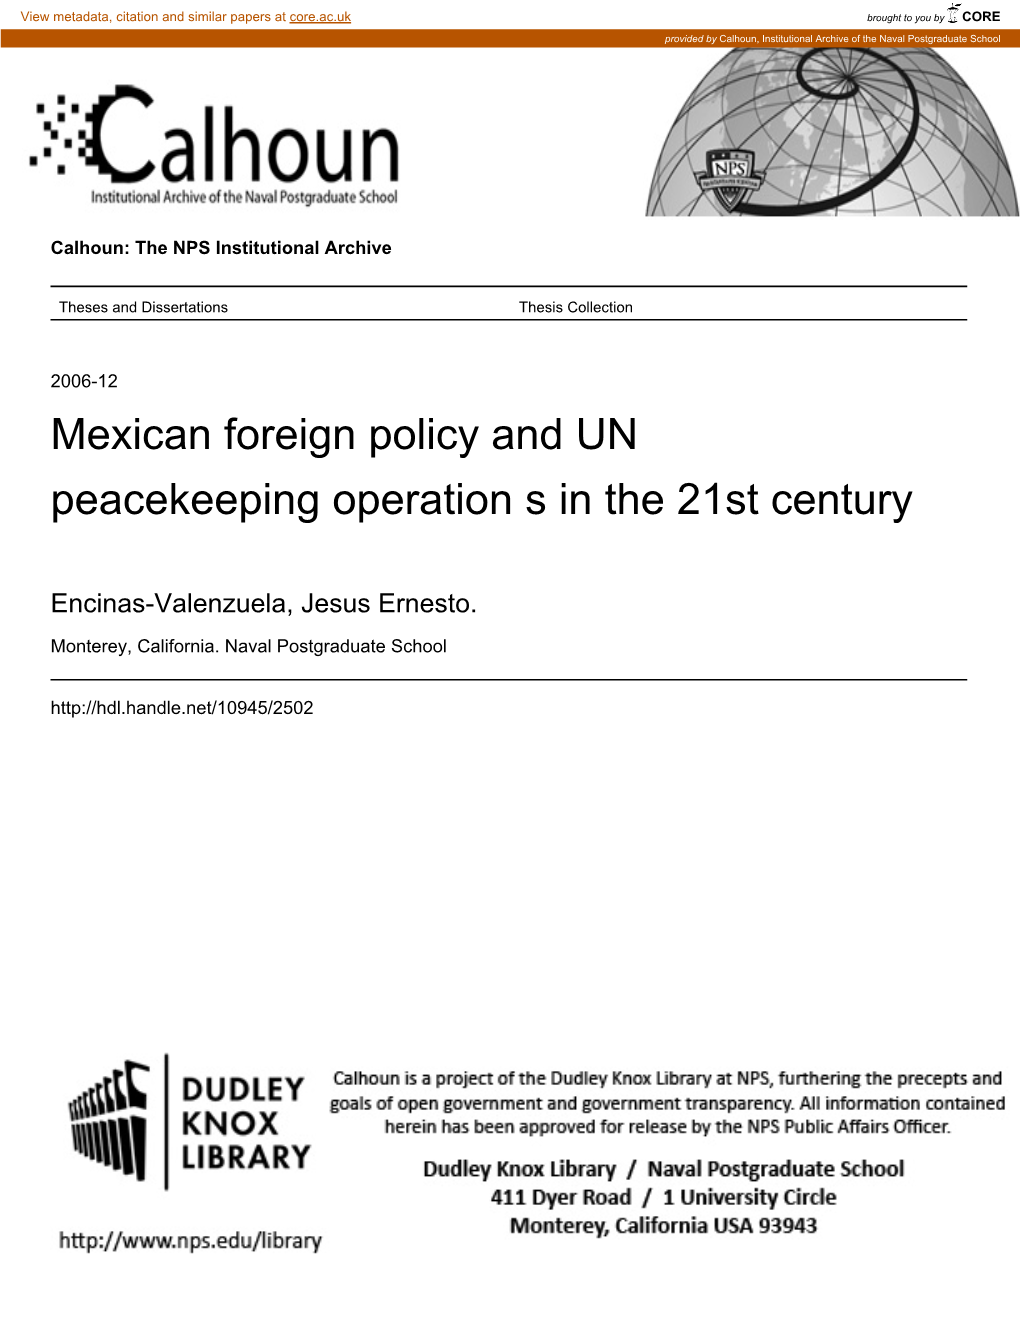 Mexican Foreign Policy and UN Peacekeeping Operation S in the 21St Century